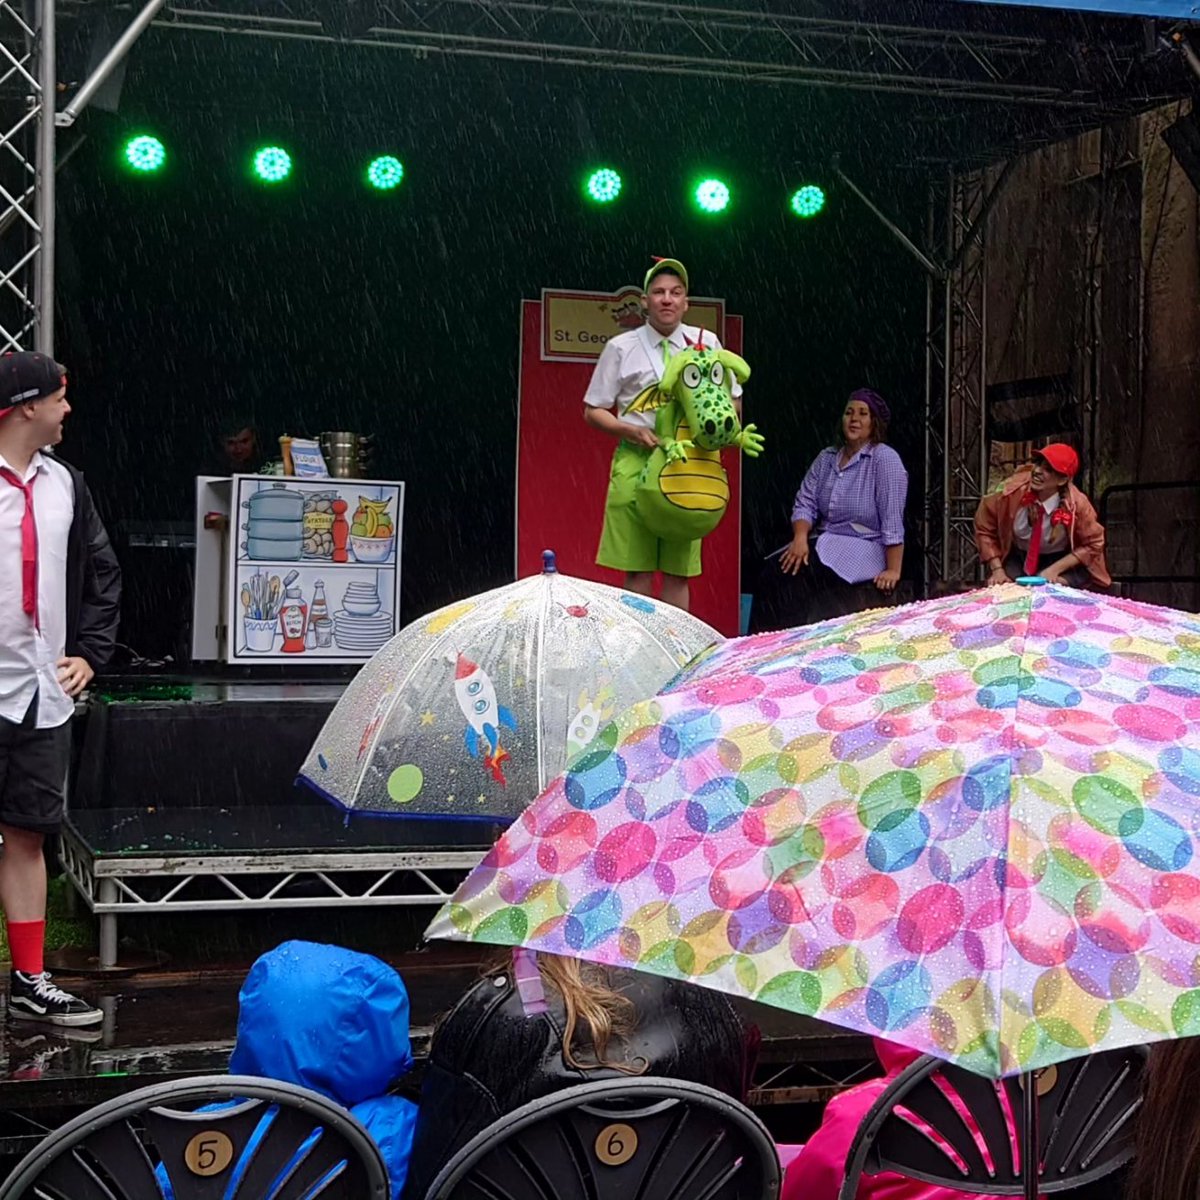 Despite the rain, we had a fantastic time watching 'Fred the Musical' by @FayEvansAuthor yesterday. What a great show. I am still singing the songs. With @maddy_templeman at @stlukesboc @LpoolTFestival #Liverpool #LivLitCycle